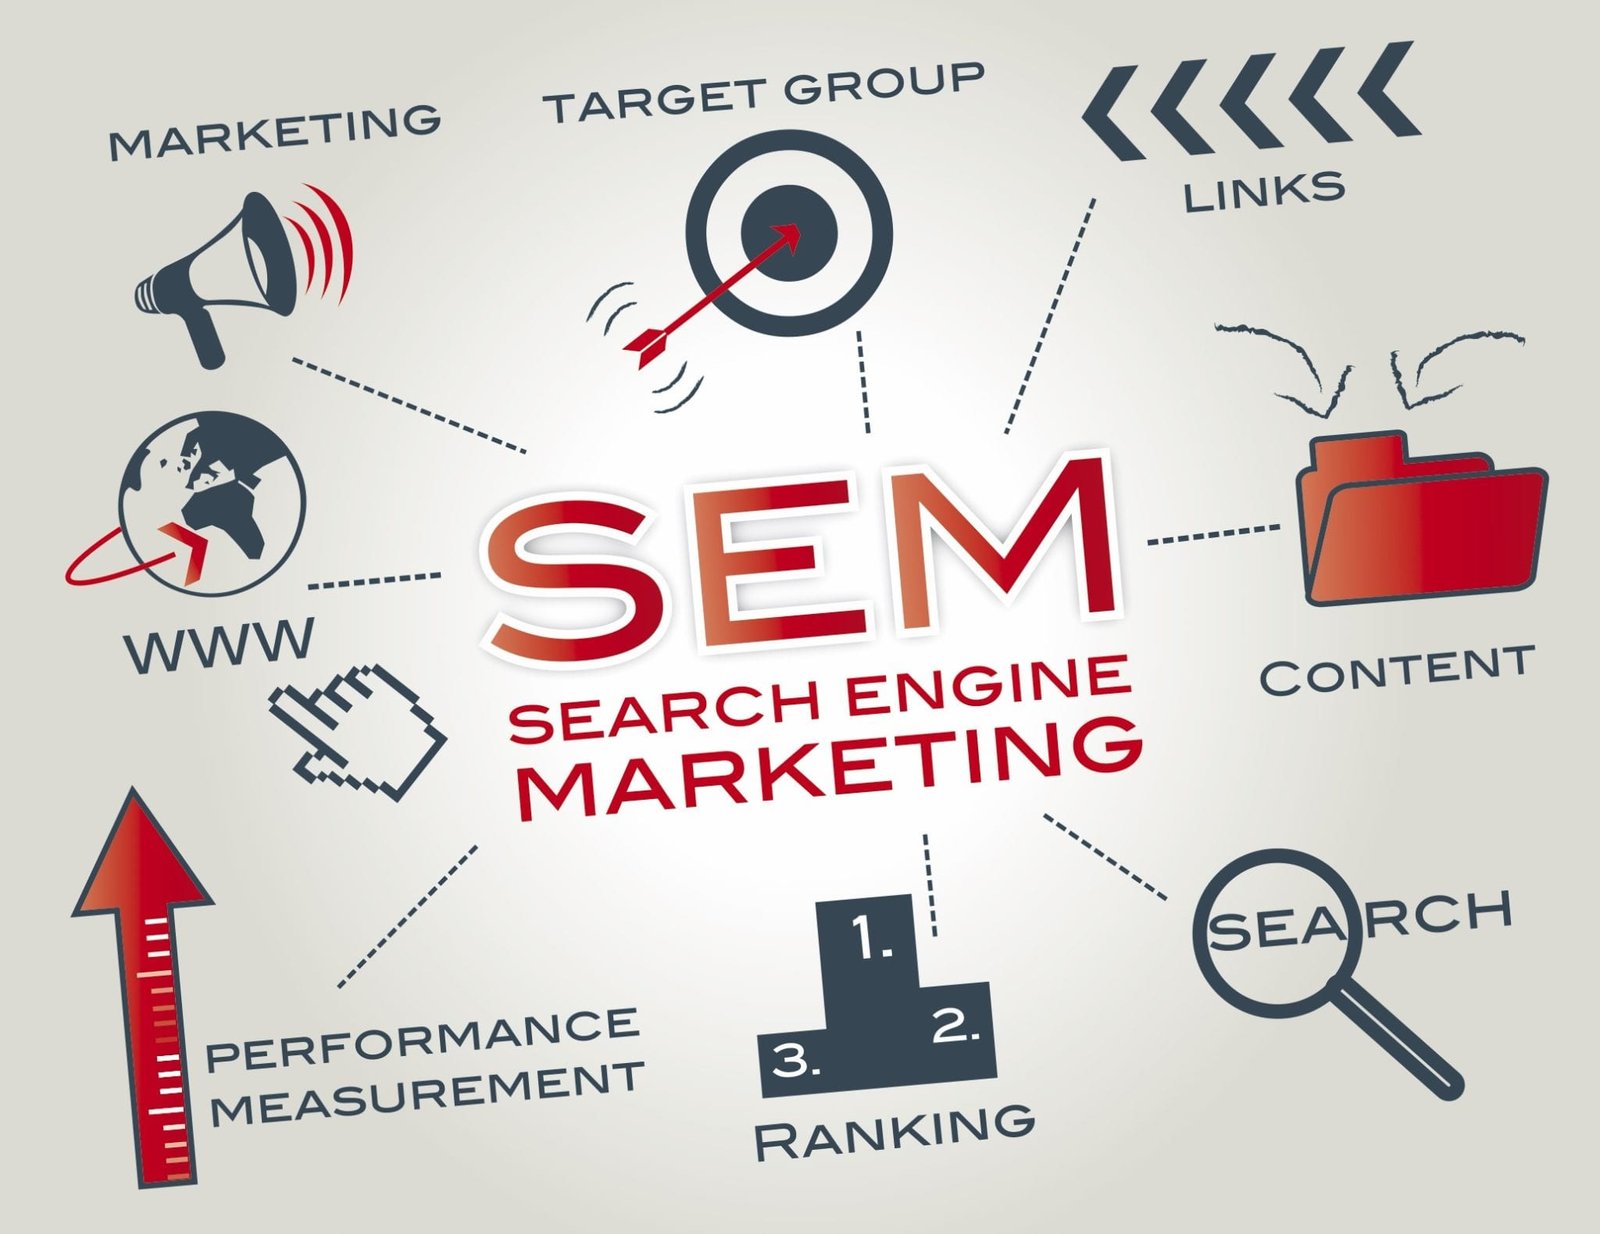 Search engine marketing (SEM) is a digital marketing strategy used to increase the visibility of a website in search engine results pages (SERPs).